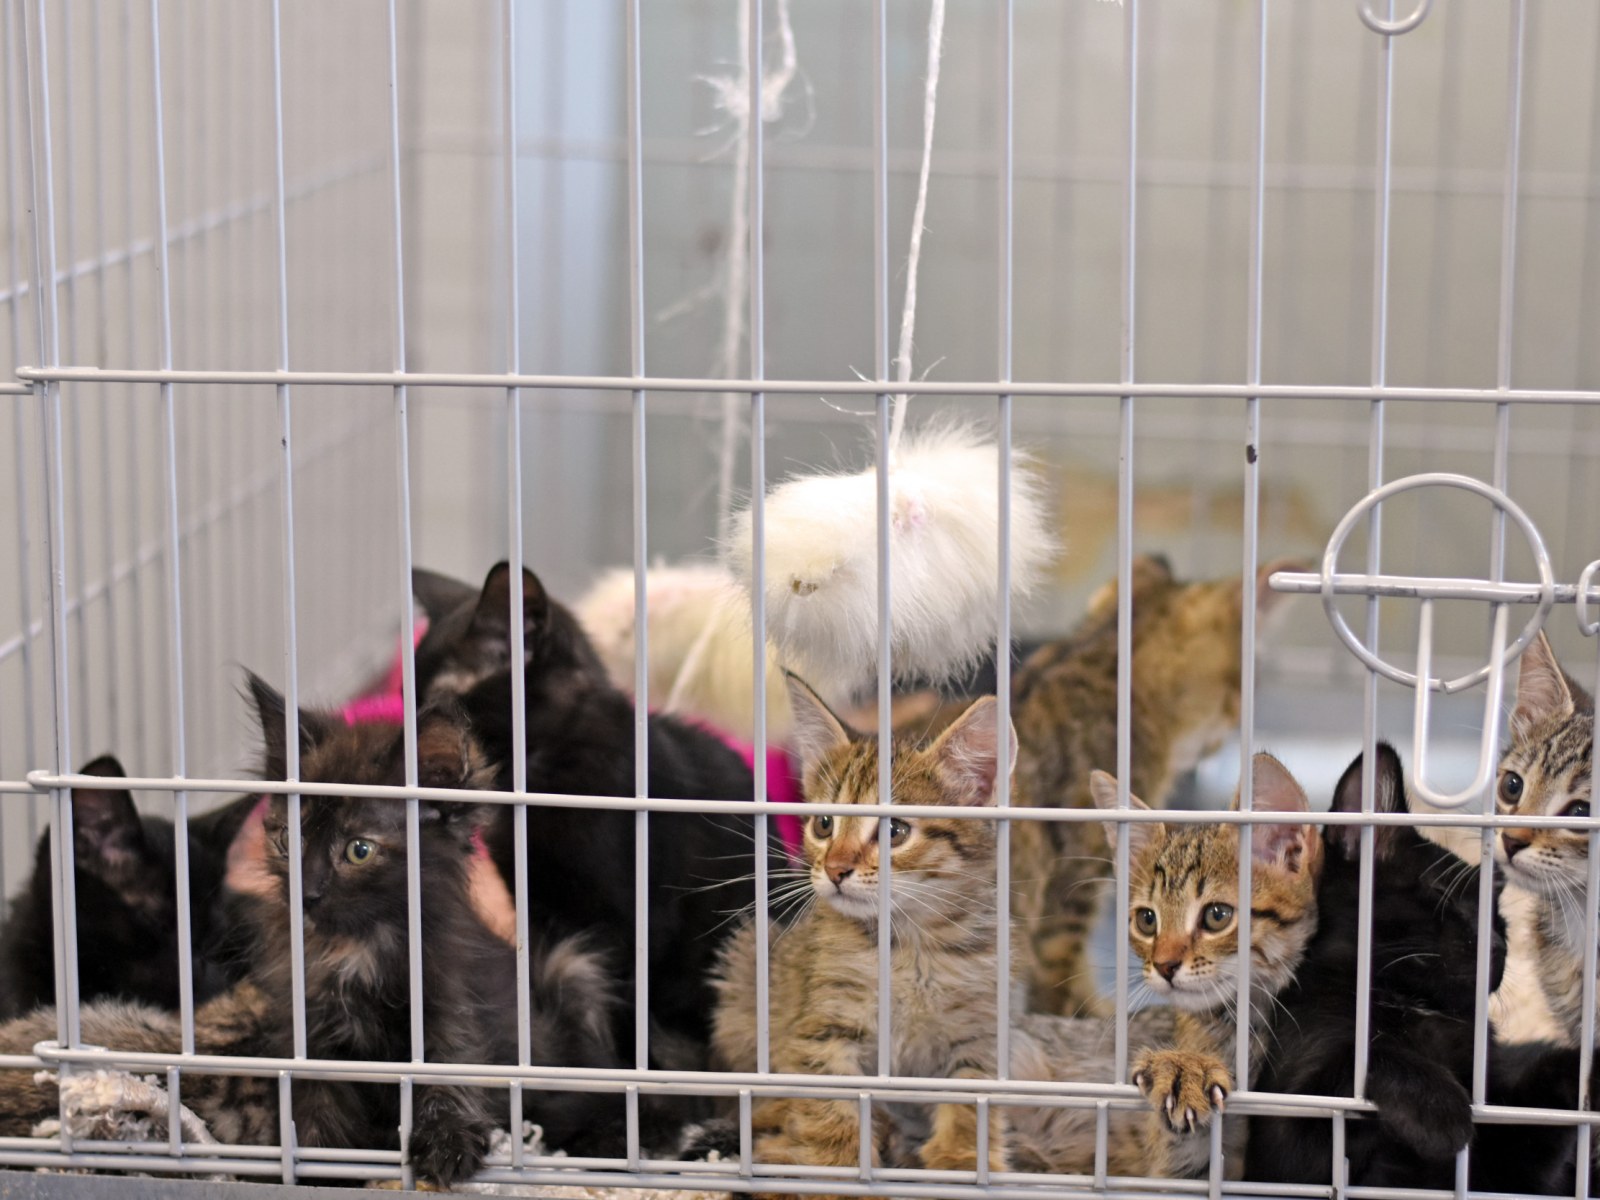 Animal Control Responds to 'Out of Control' Hoarding Situation, Rescues 133  Cats